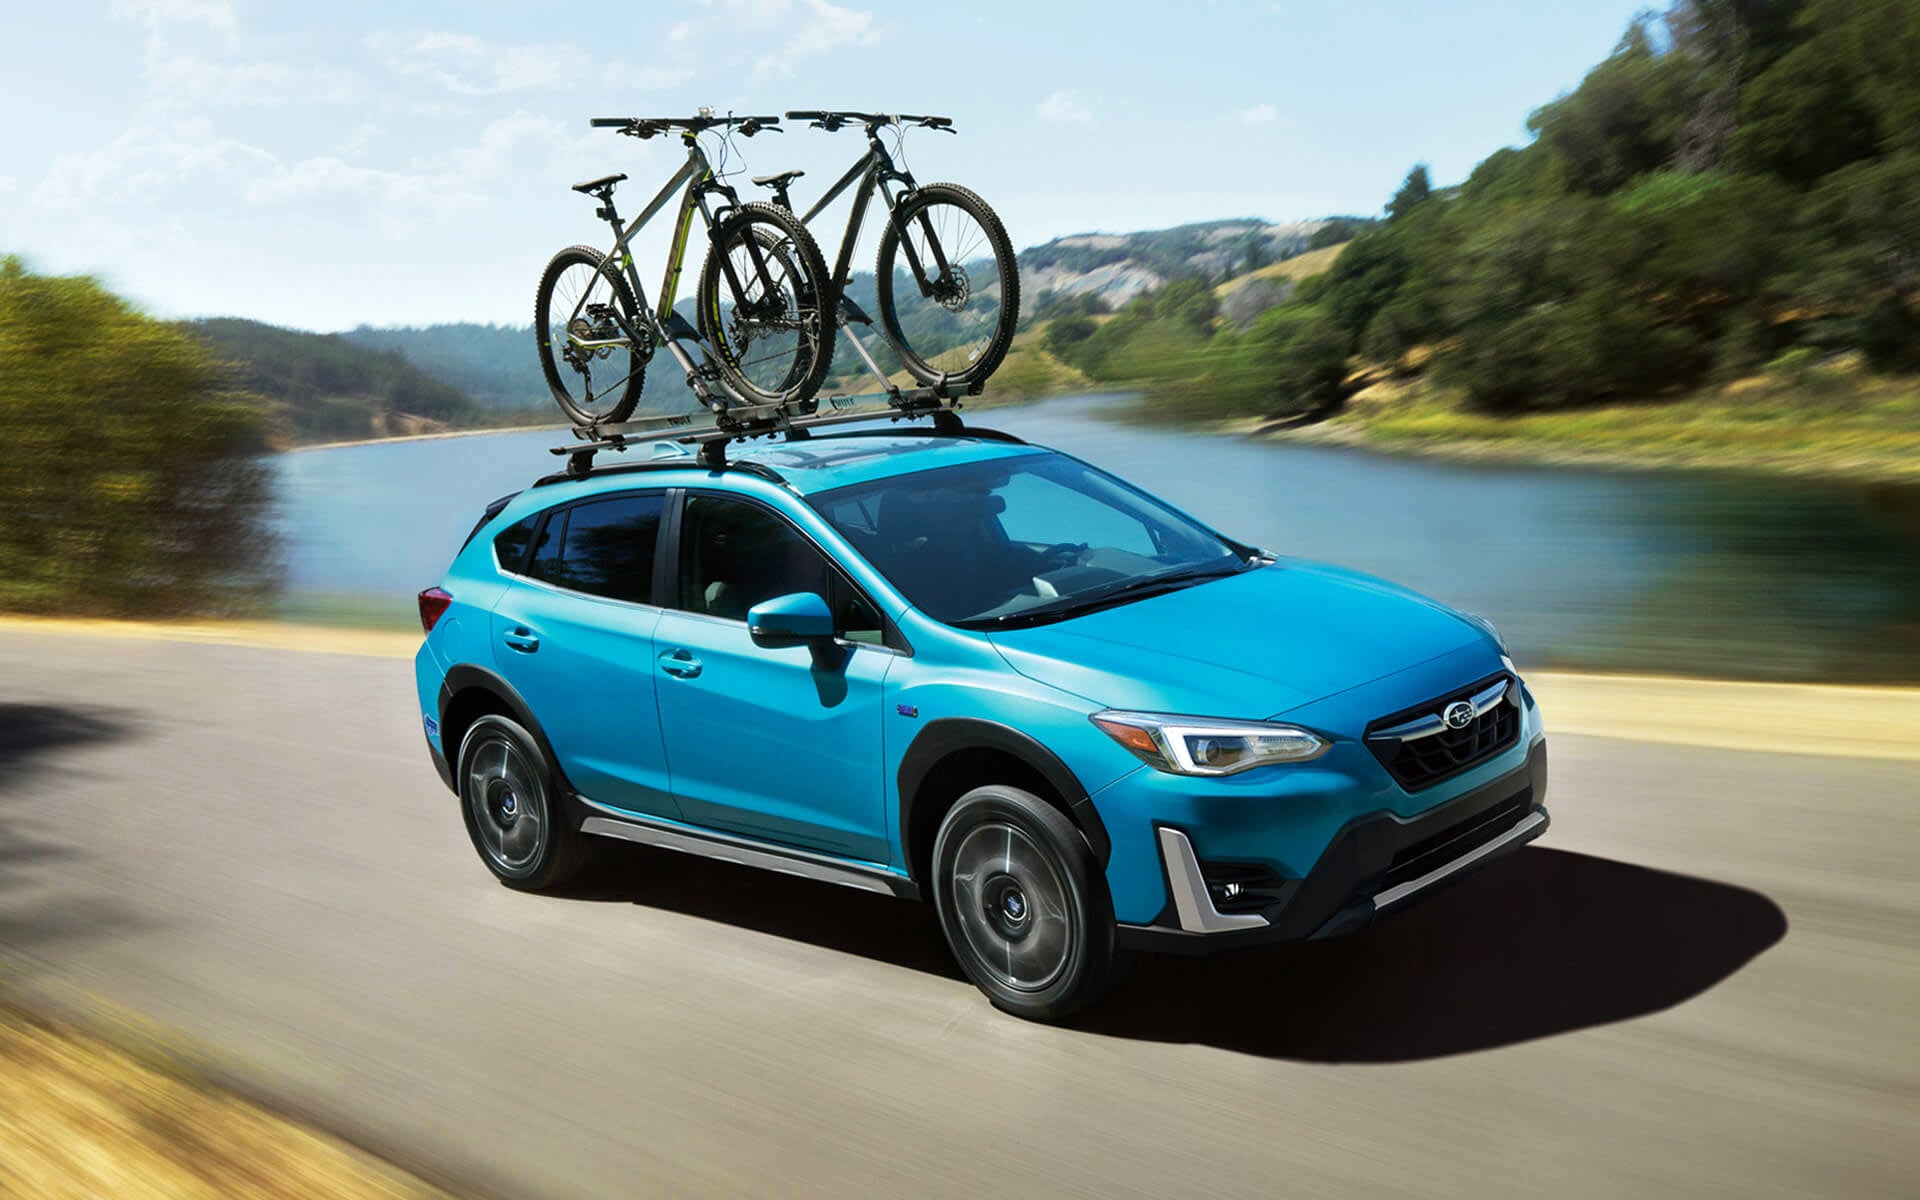 A blue Crosstrek Hybrid with two bicycles on its roof rack driving beside a river | Dyer Subaru in Vero Beach FL